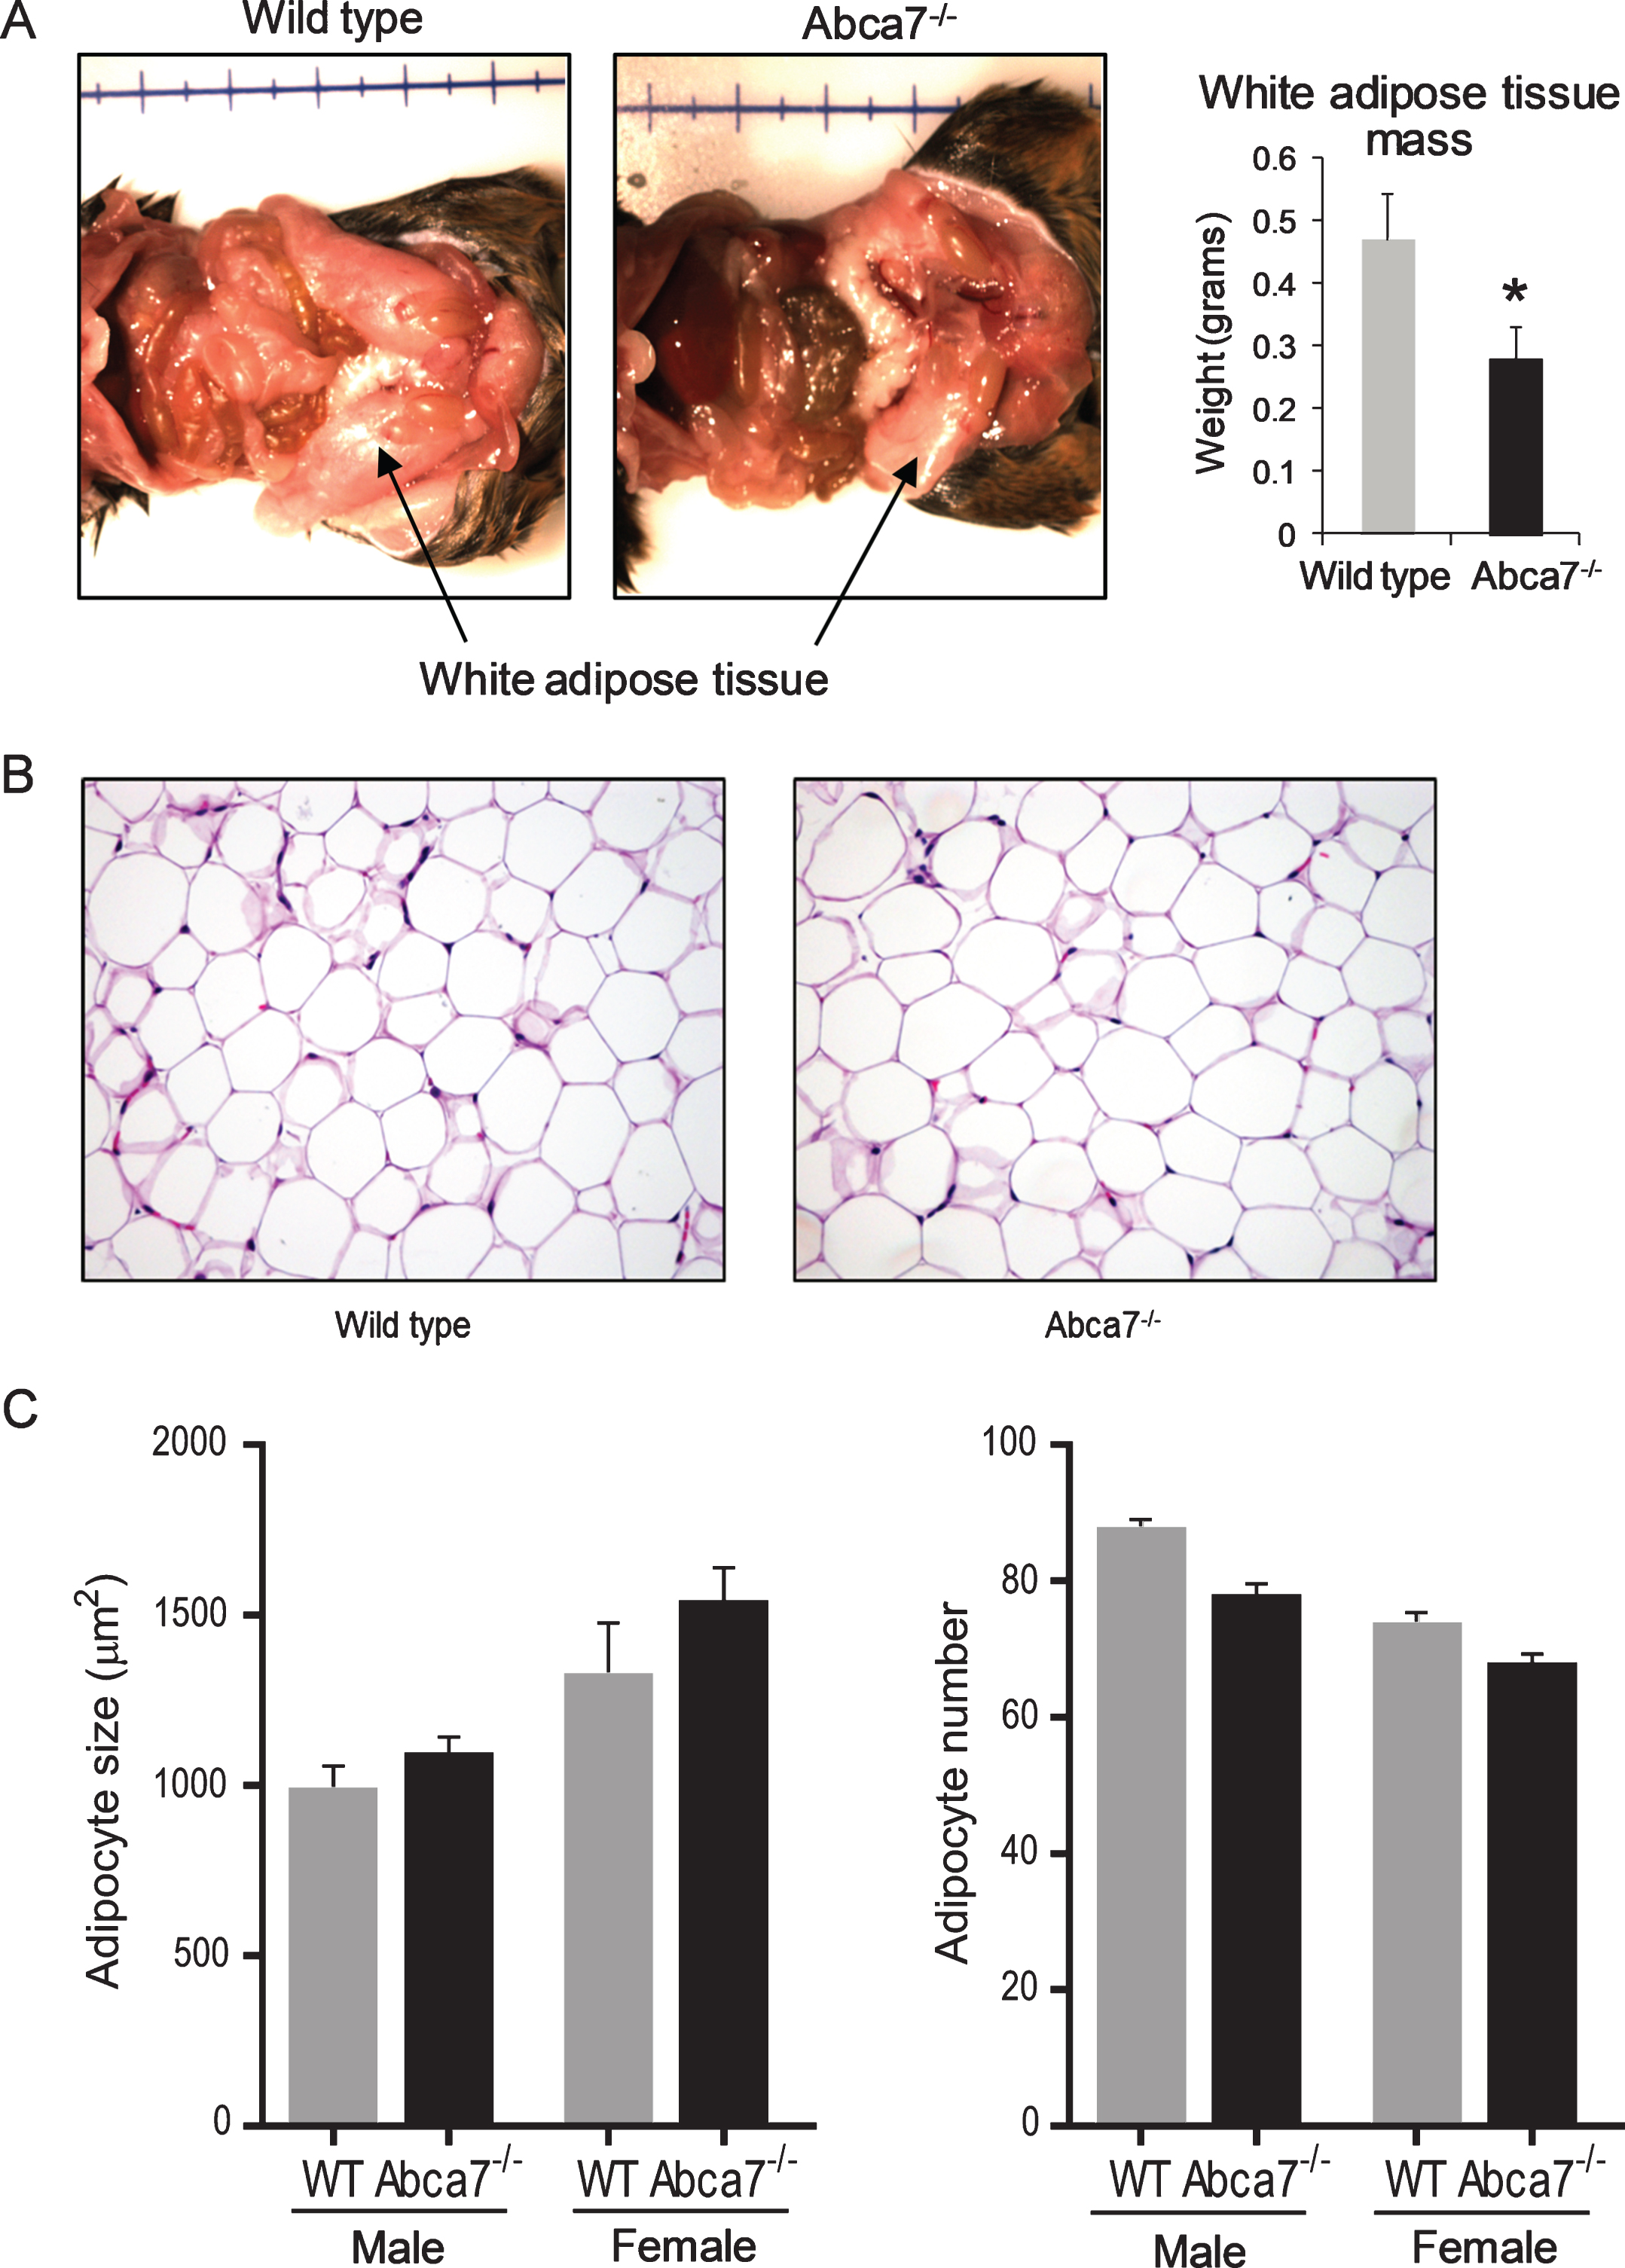 Deletion of ABCA7 causes a reduction in white adipose tissue (WAT) in female Abca7–/– mice. A) WAT mass is dramatically reduced in female Abca7–/– mice. Data represent mean (n = 13) and SE as error bars,  *p < 0.05. B) A representative H&E stained section of WAT from female wild type and Abca7–/– mice. C) No significant difference in adipocyte cell size or number between wild type and Abca7–/– mice. Data represent mean (n = 6) and SE as error bars.